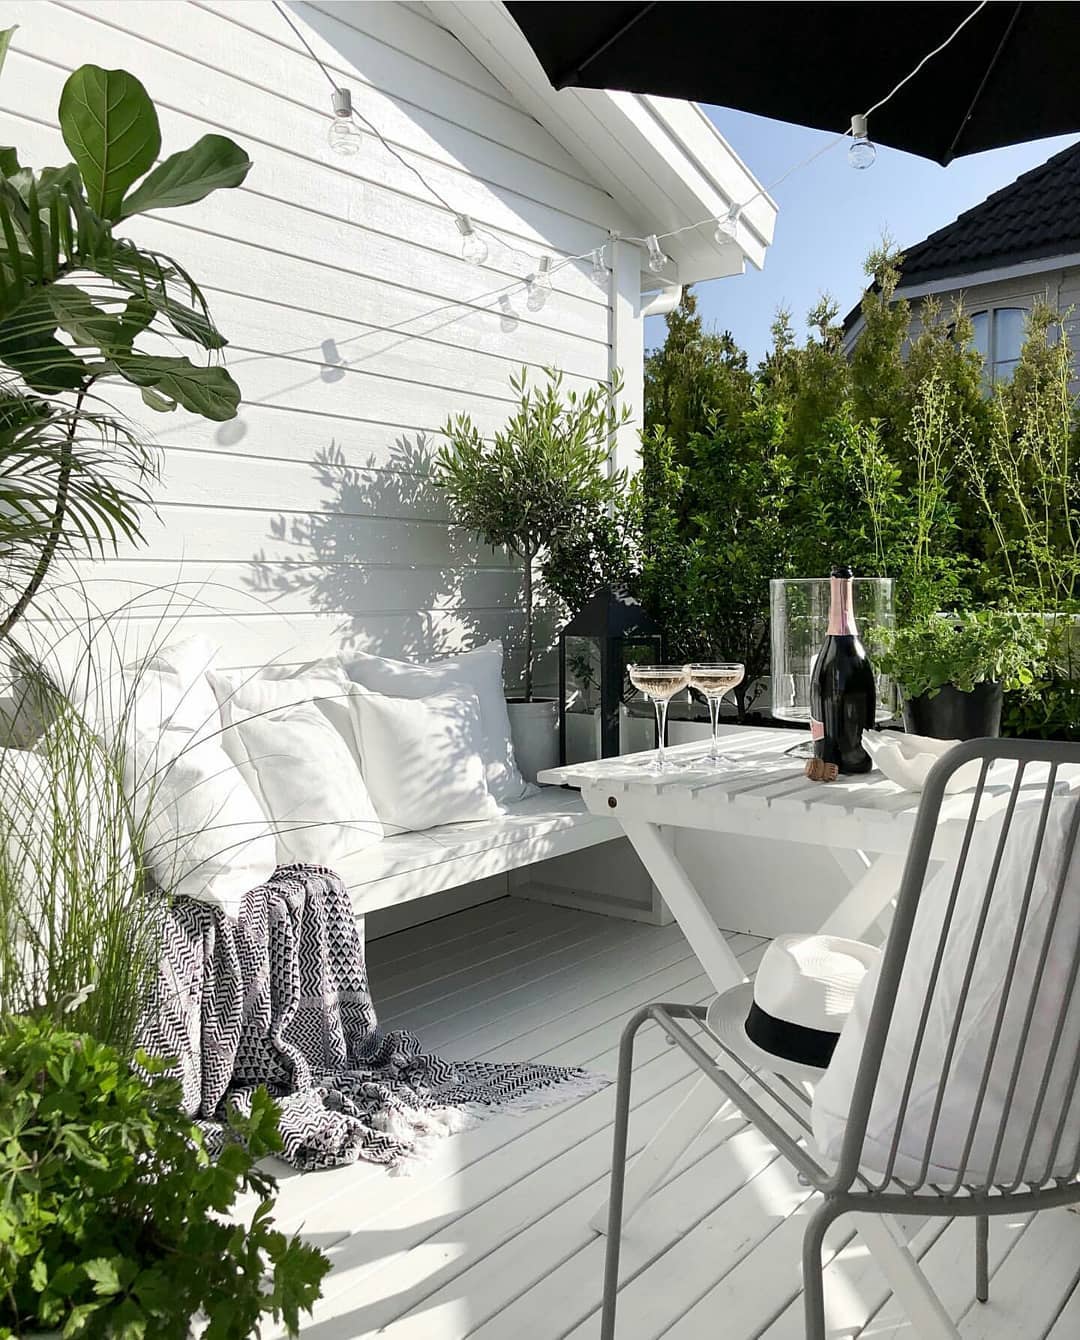 Outdoor living space staged. Photo by Instagram user @sonja_ols